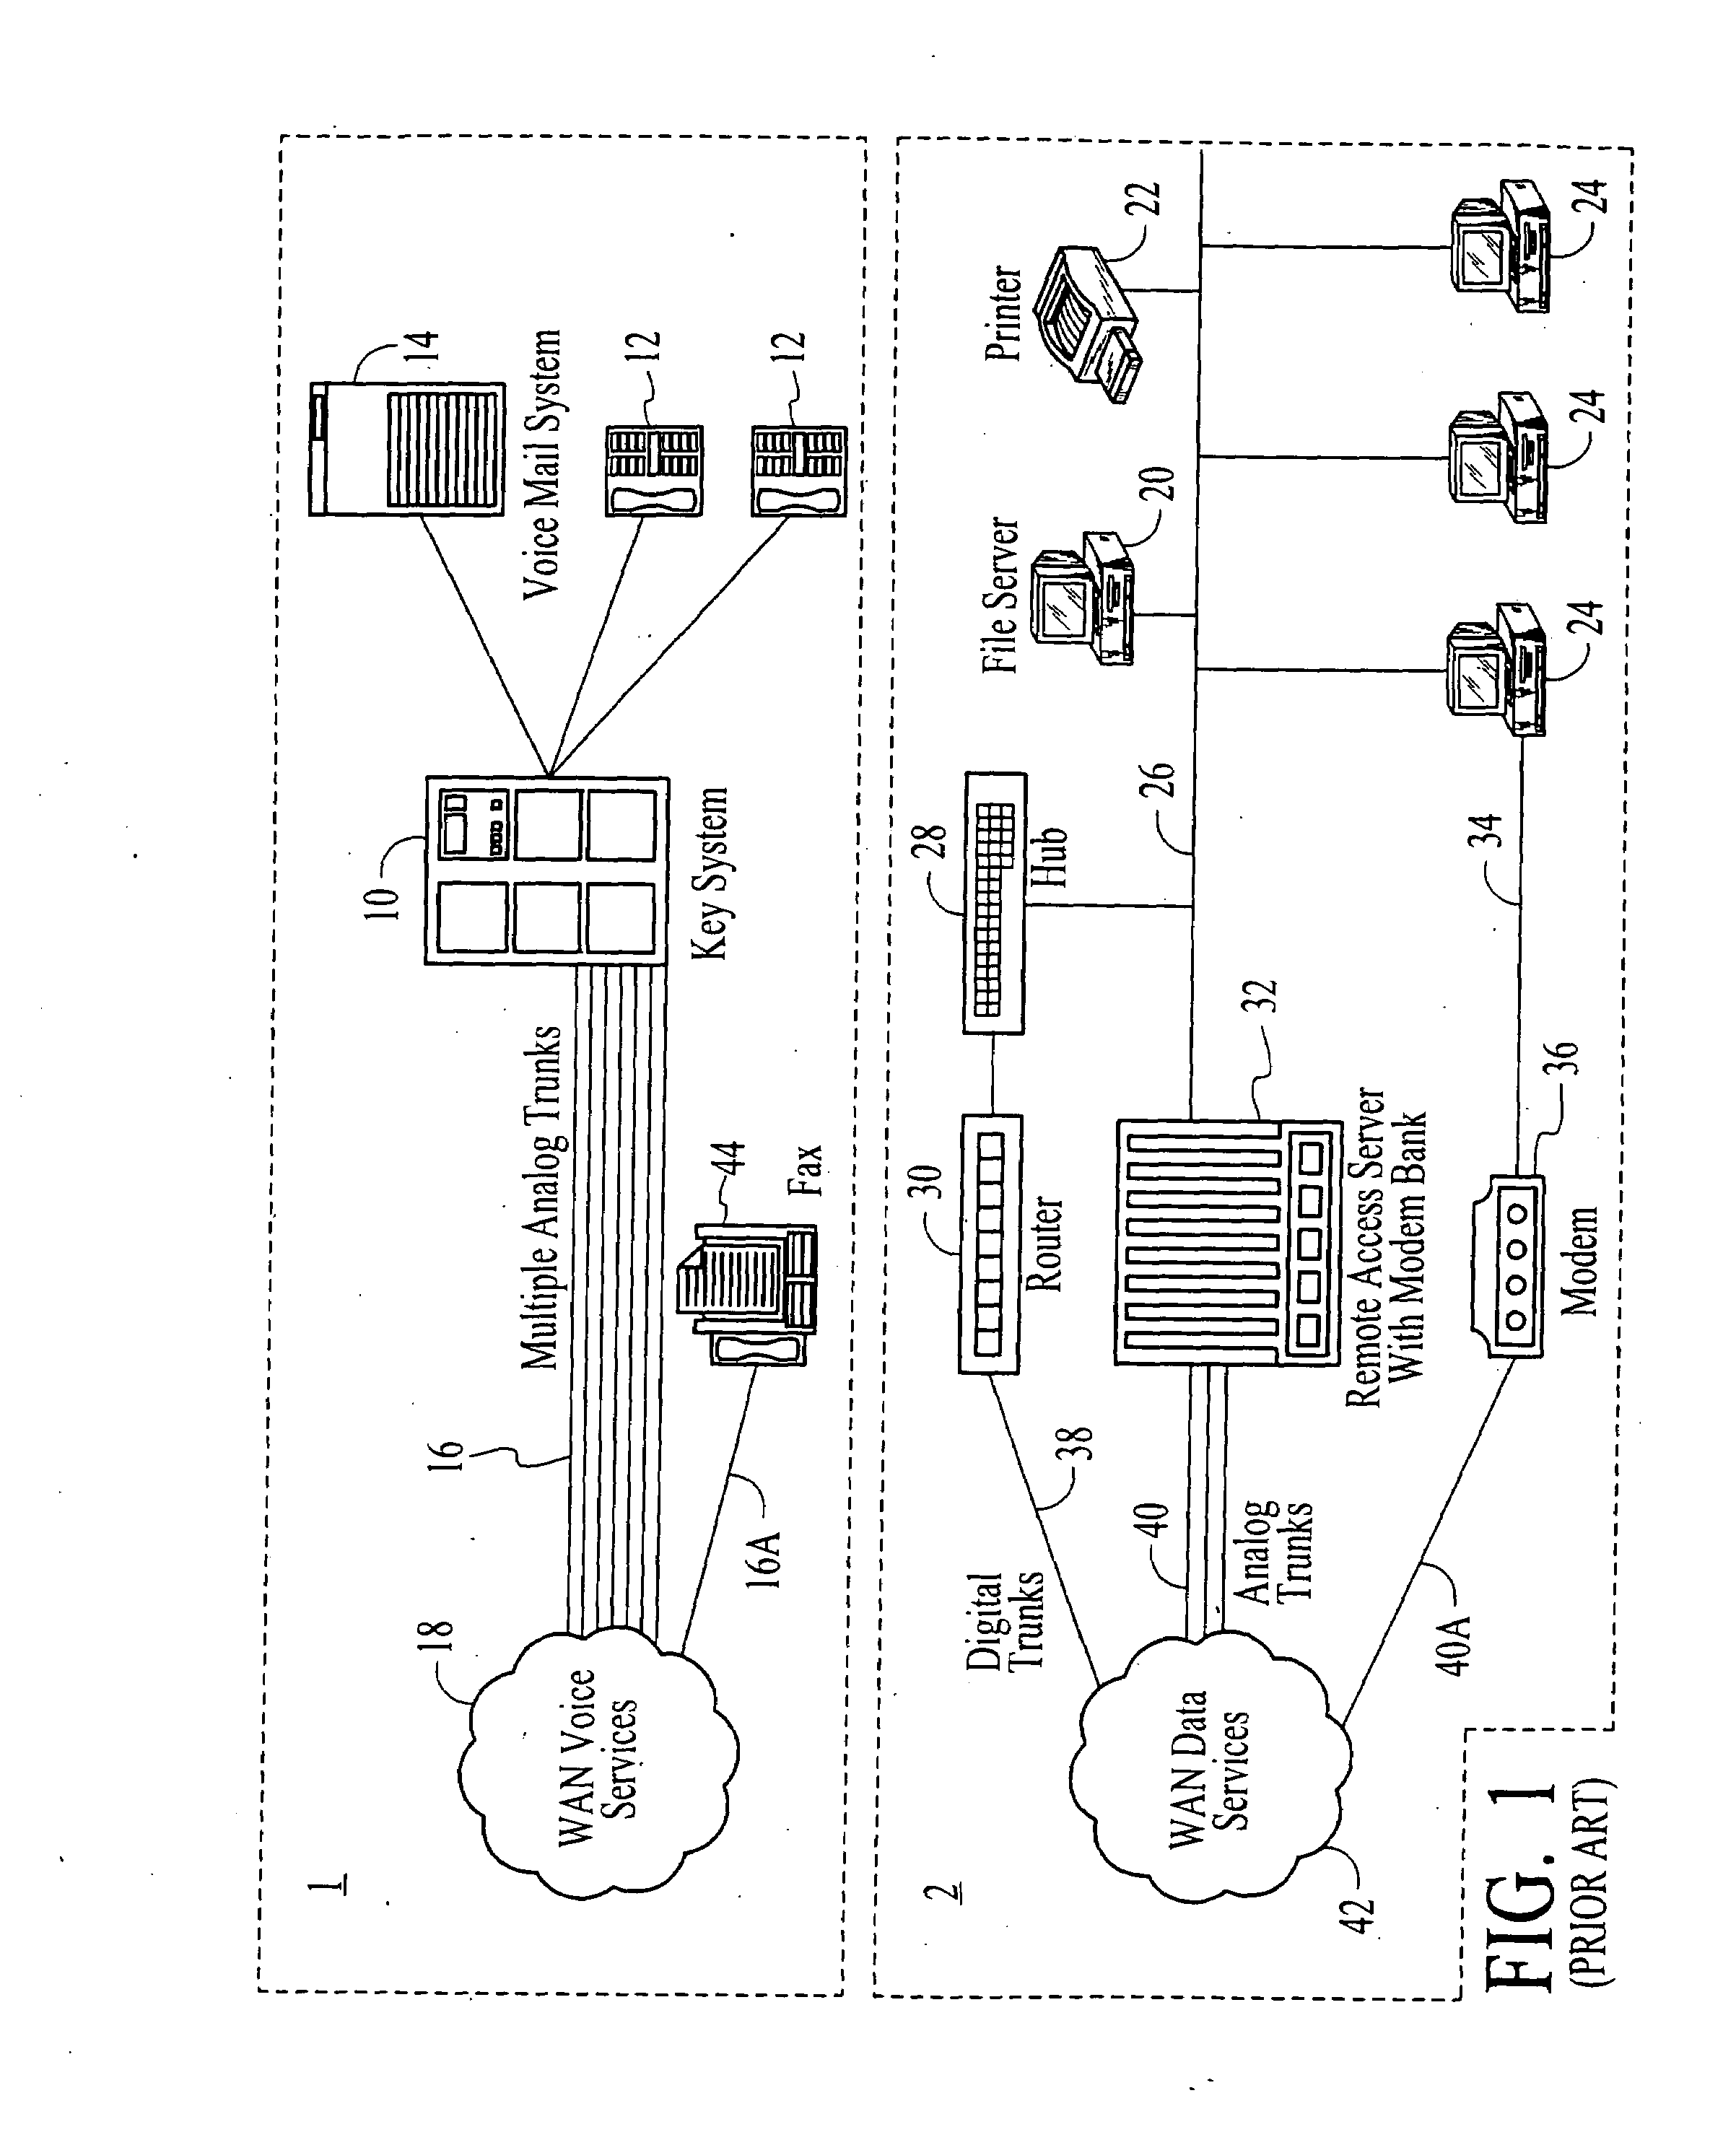 Systems and methods for providing configurable caller id iformation